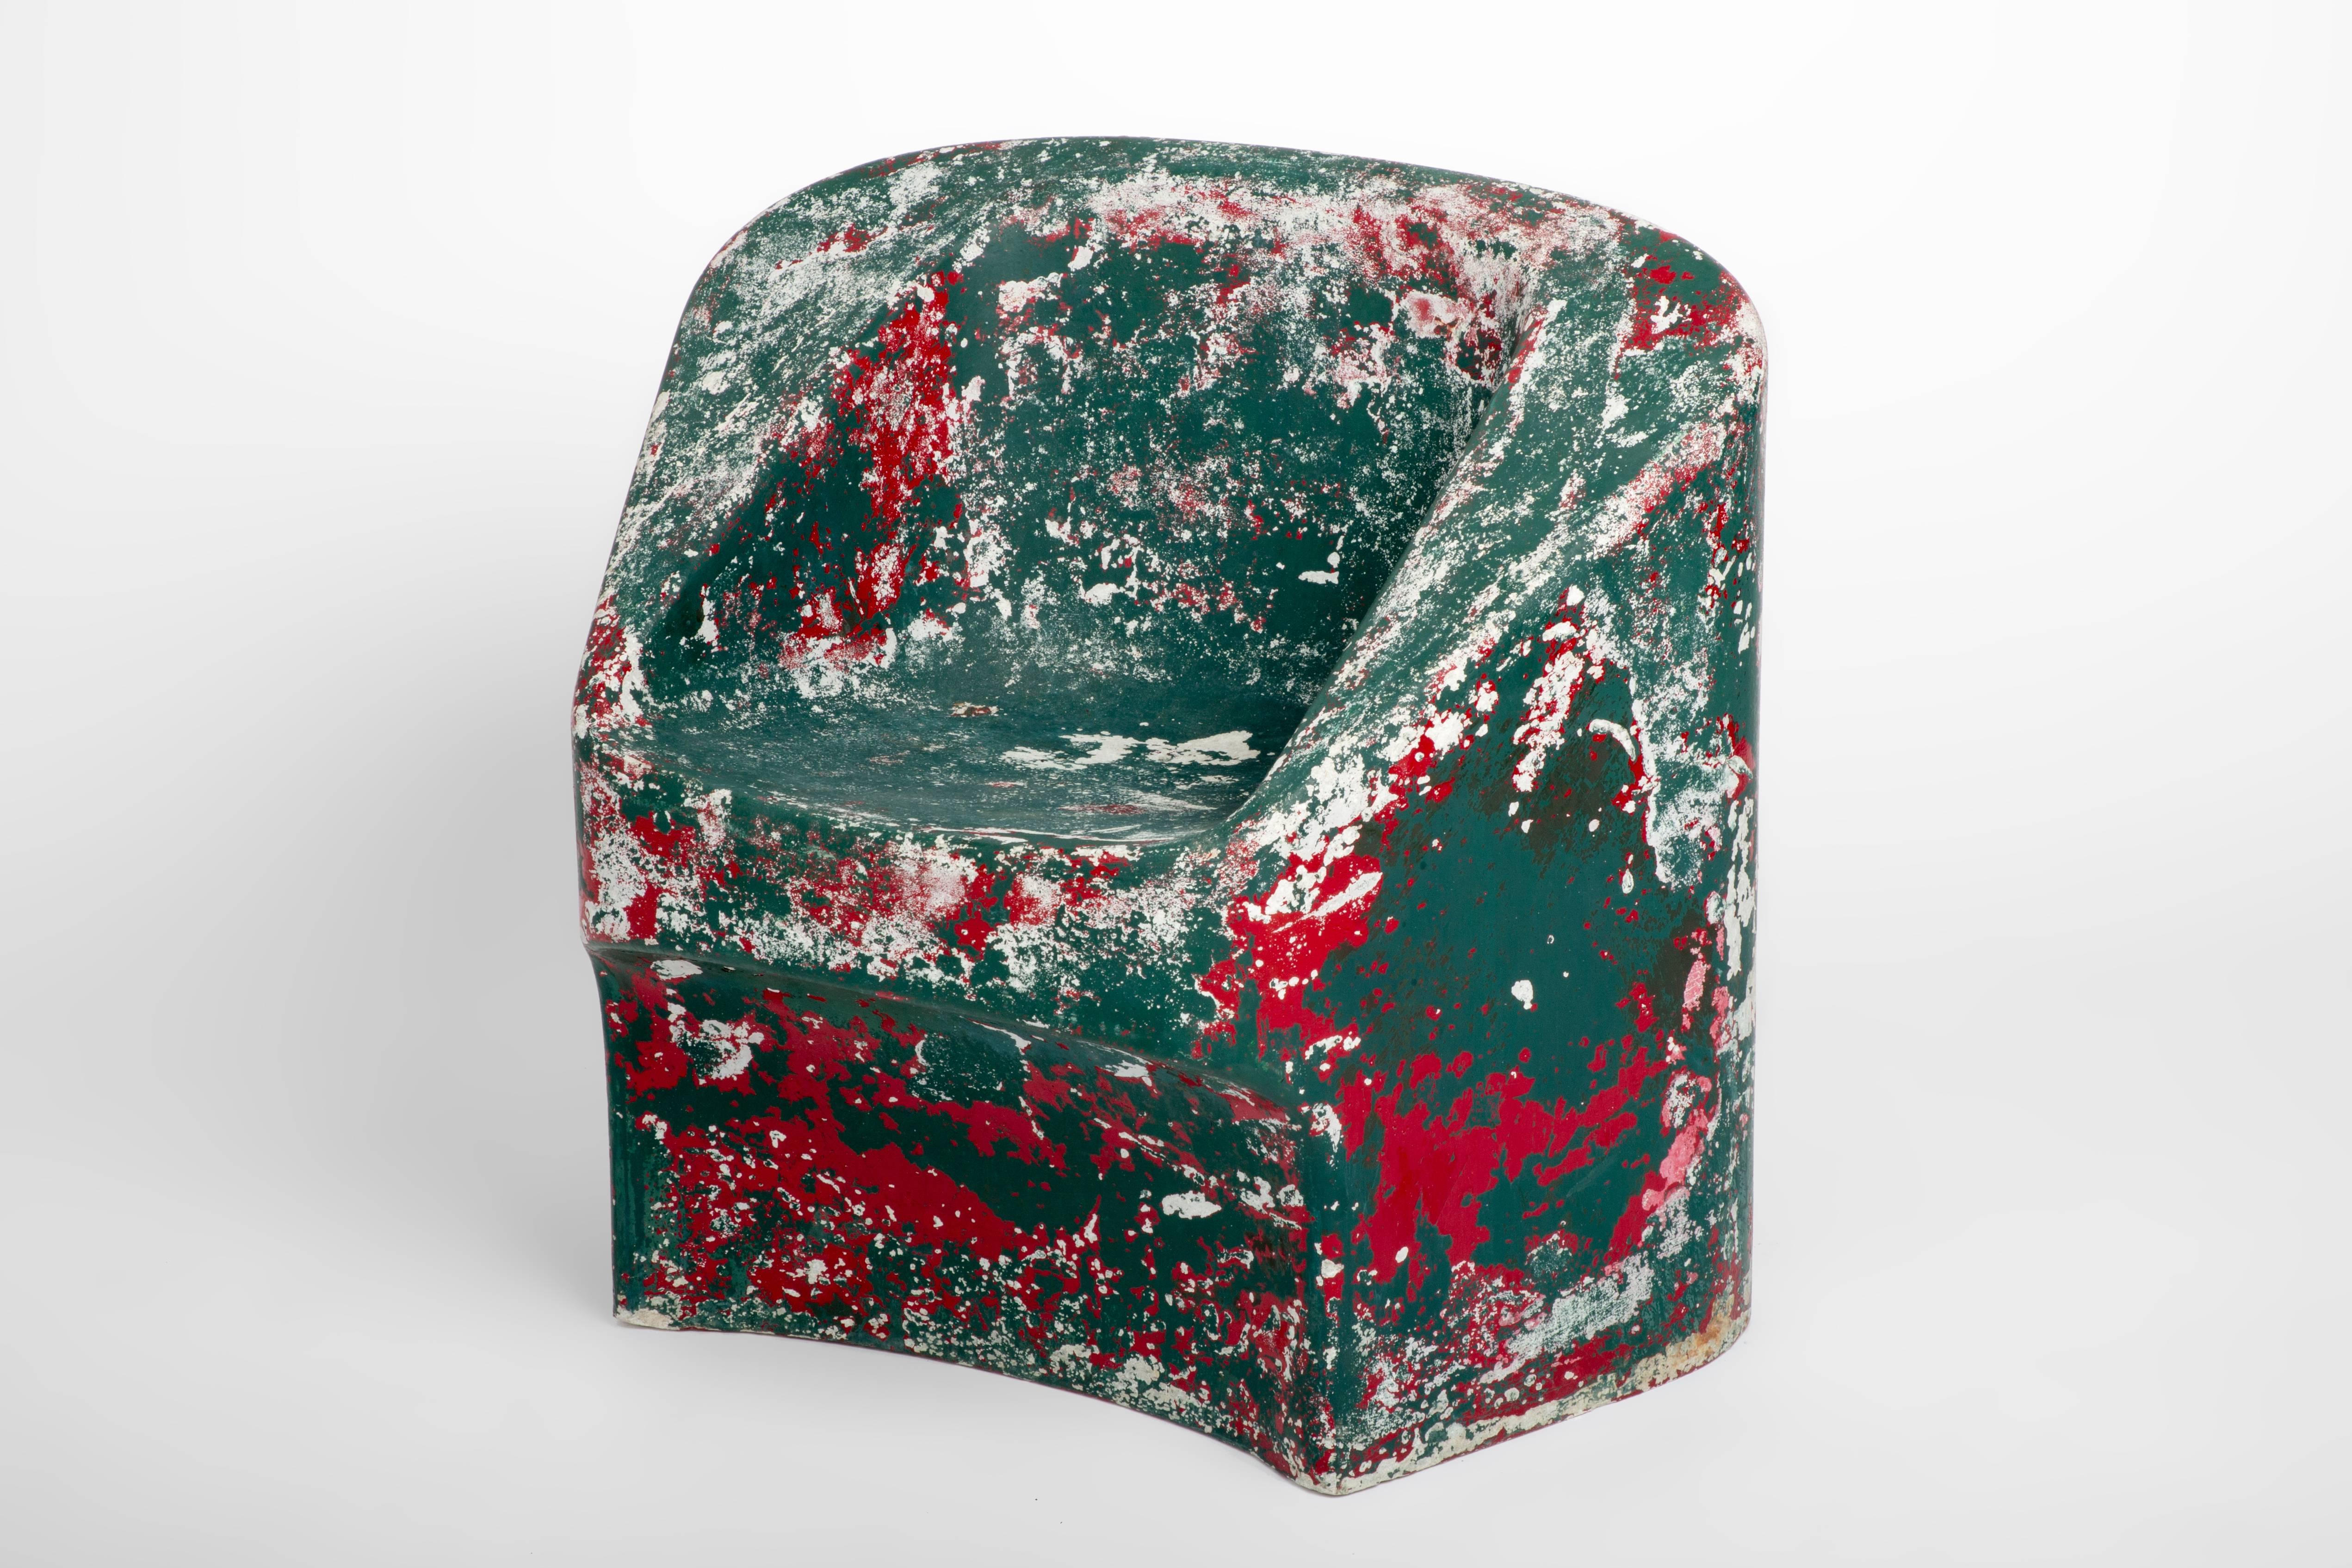 From Swiss designer Willy Guhl this is a fiberglass painted cement chair in distressed green and red hues. Guhl was a creator of innovative and neo-functional furniture, he was also one of the pioneers for flat-pack furniture.